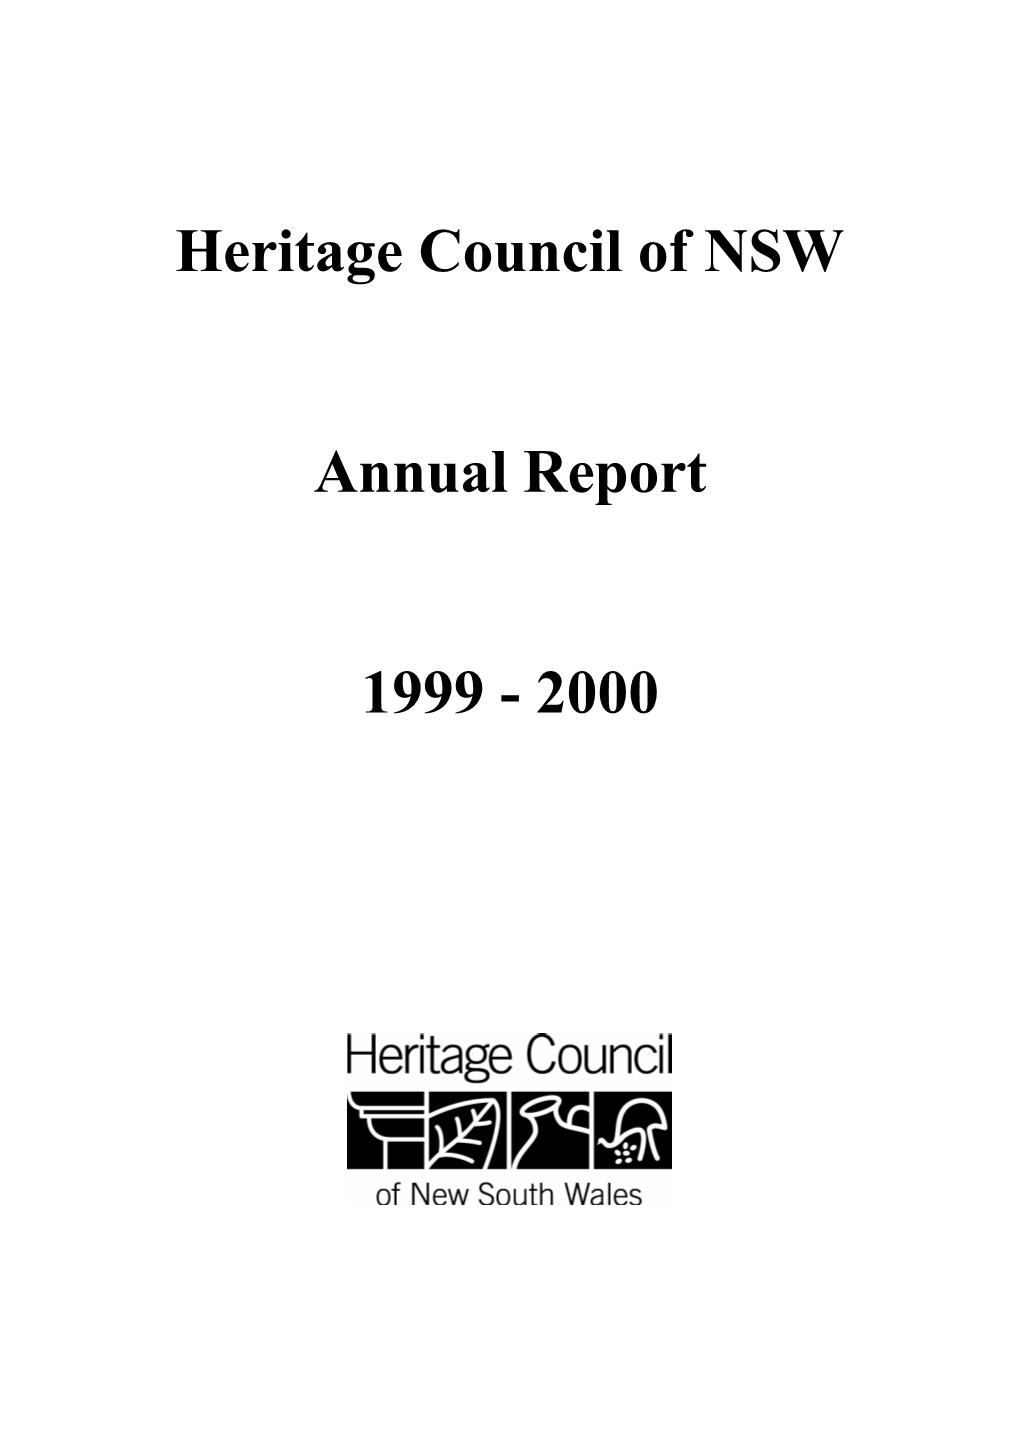 Heritage Council Report 2000